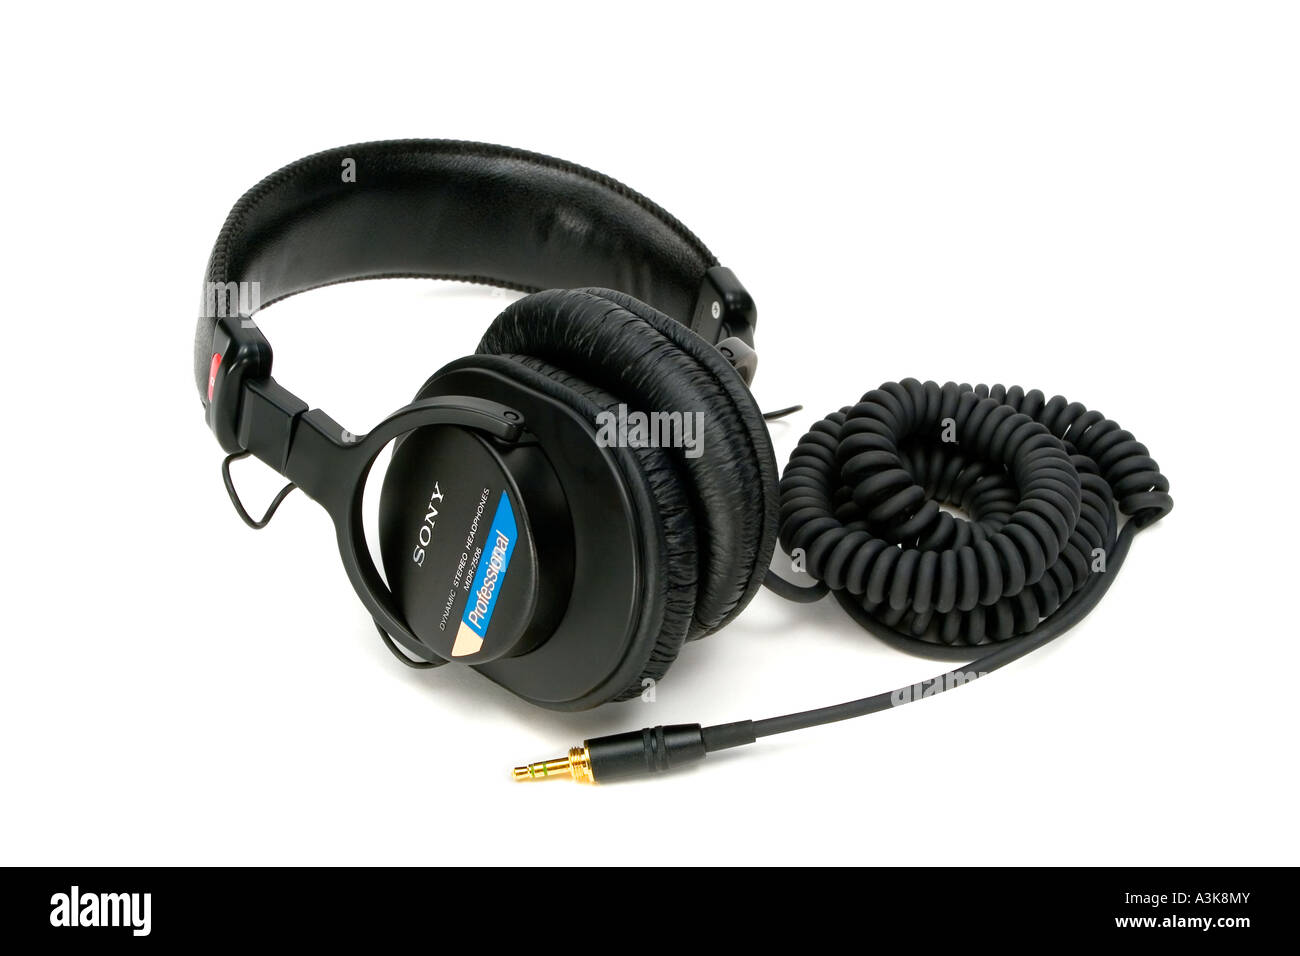 Sony Headphones High Resolution Stock Photography and Images - Alamy